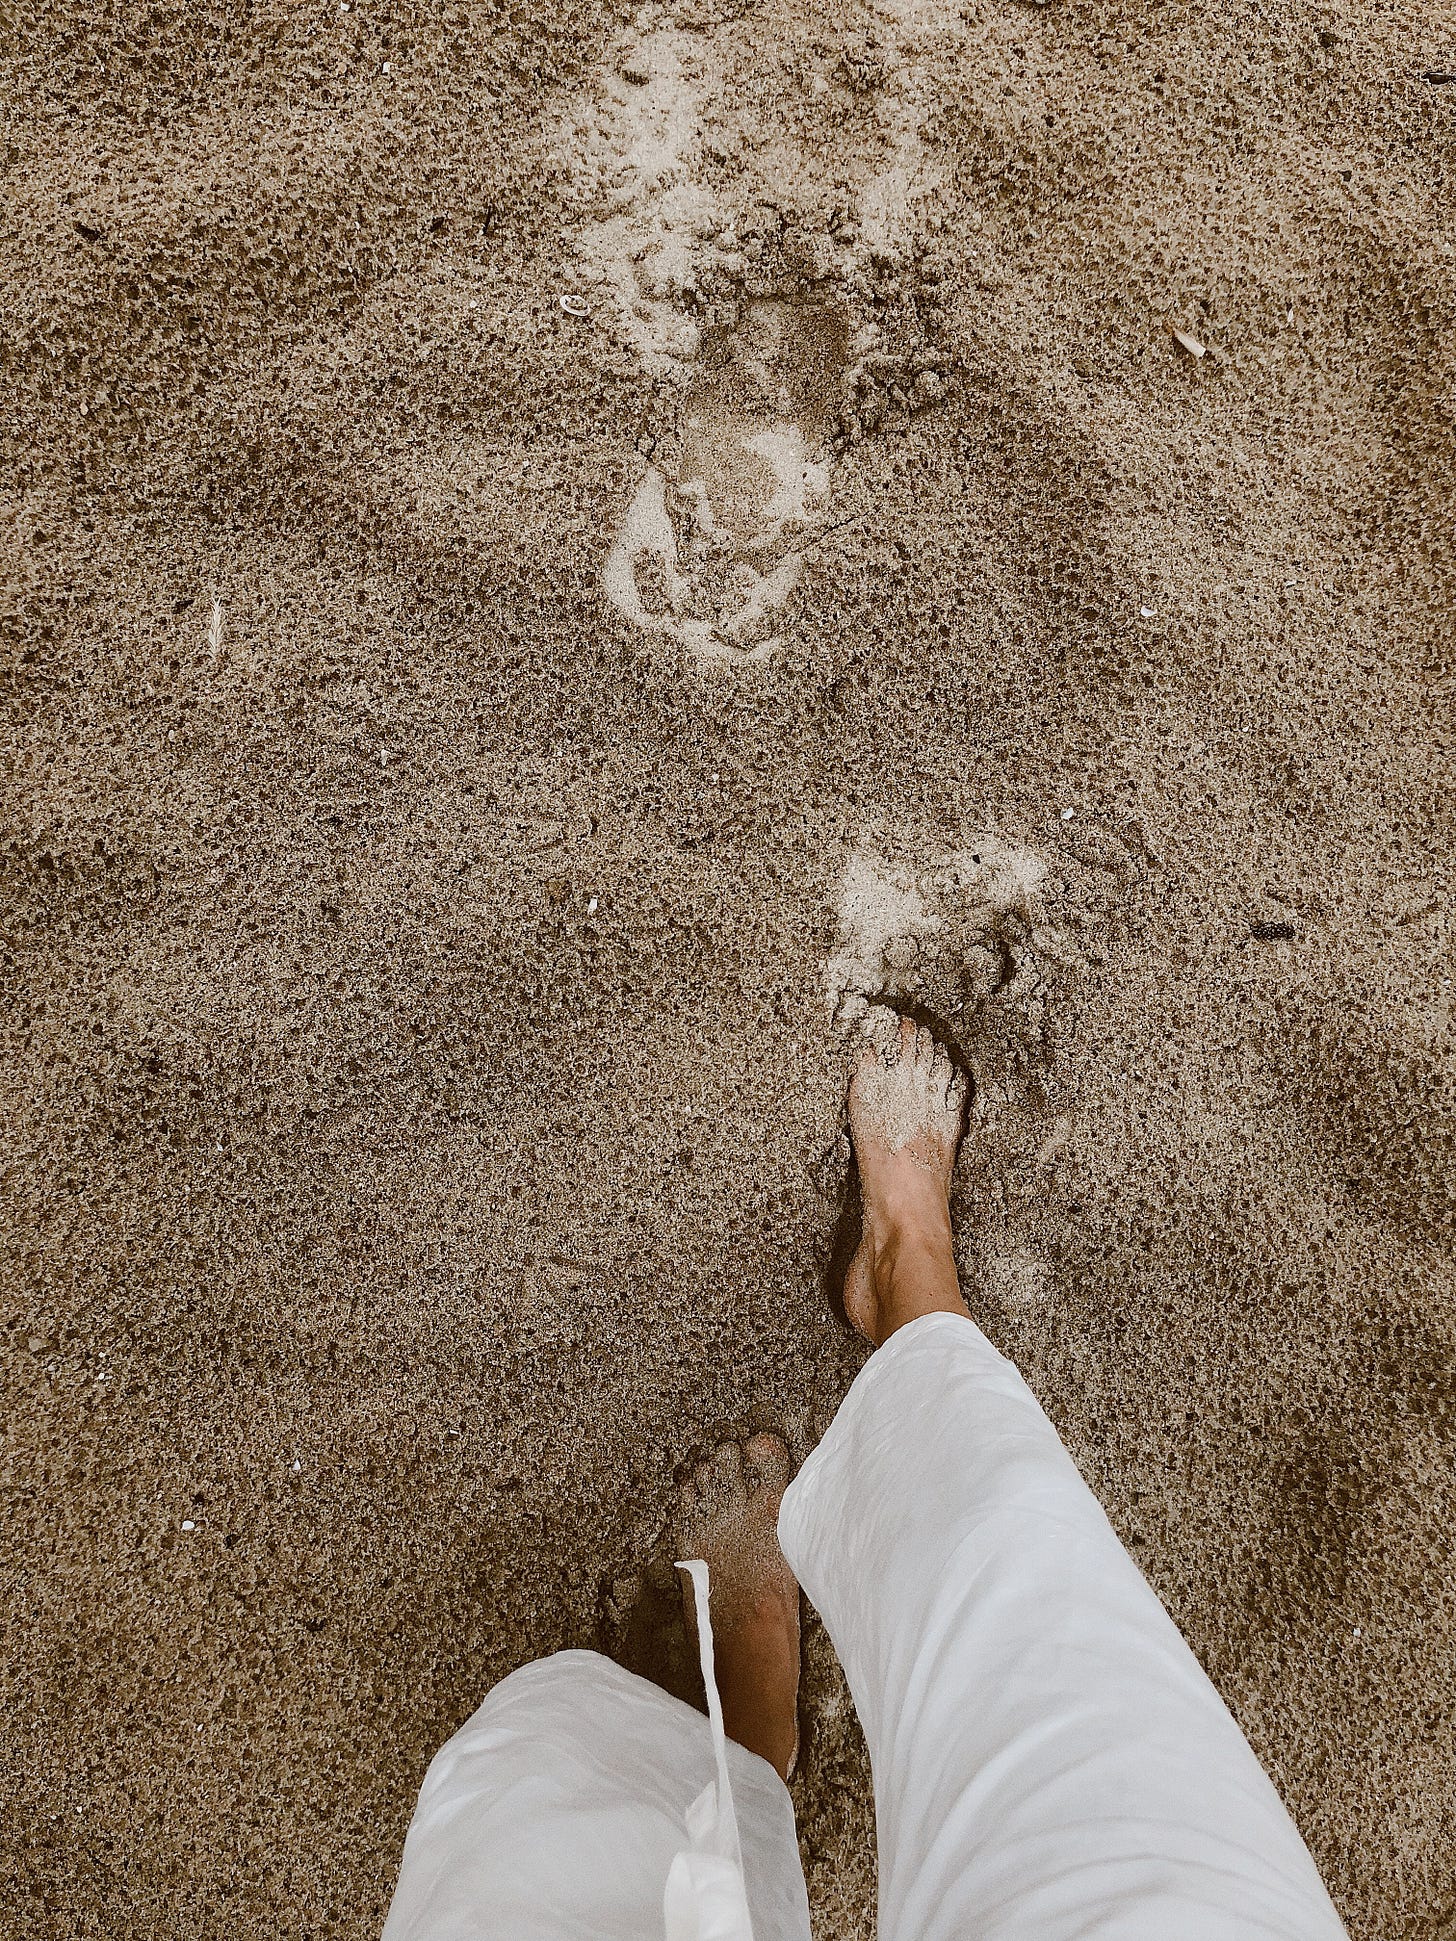 person's feet as they walk across the sand